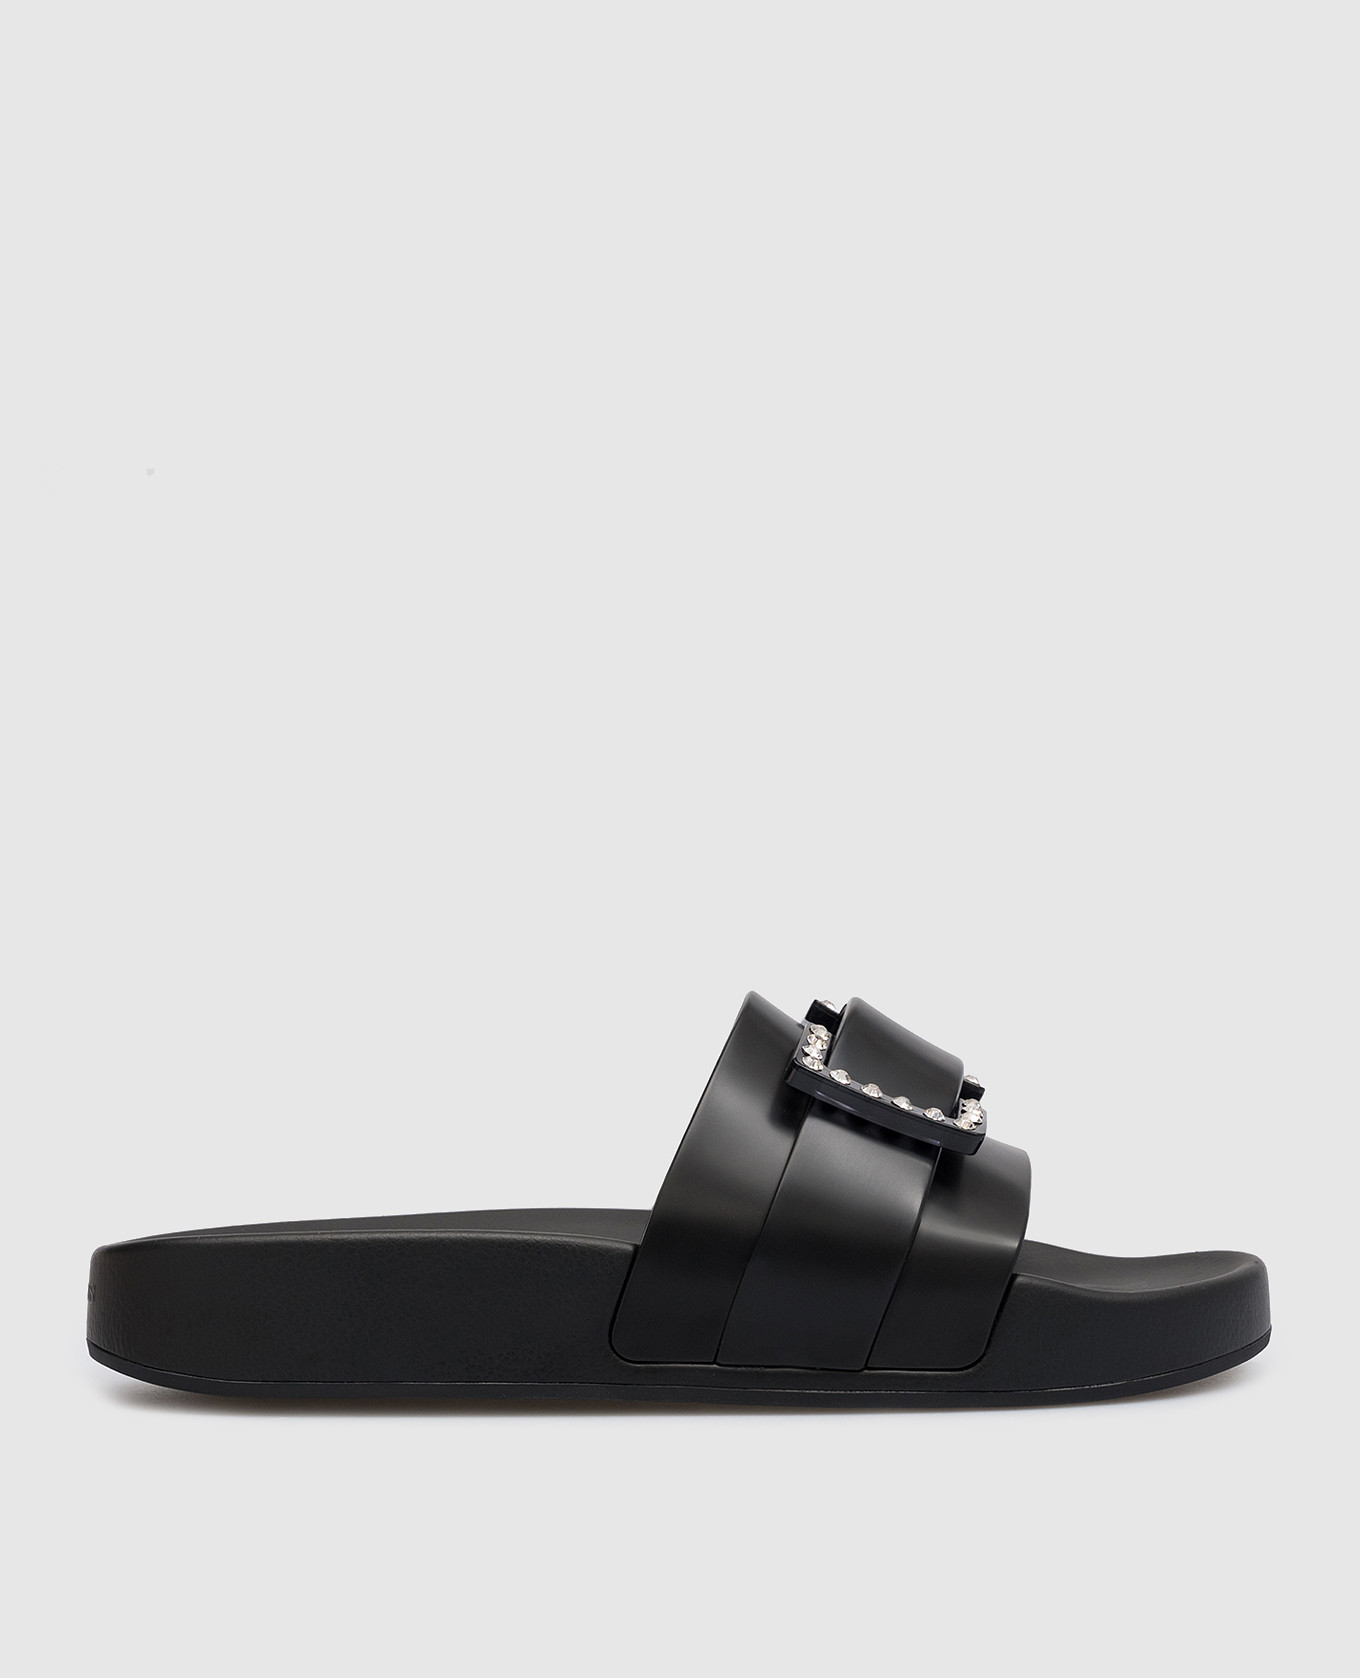 Black Jelly sliders with crystals